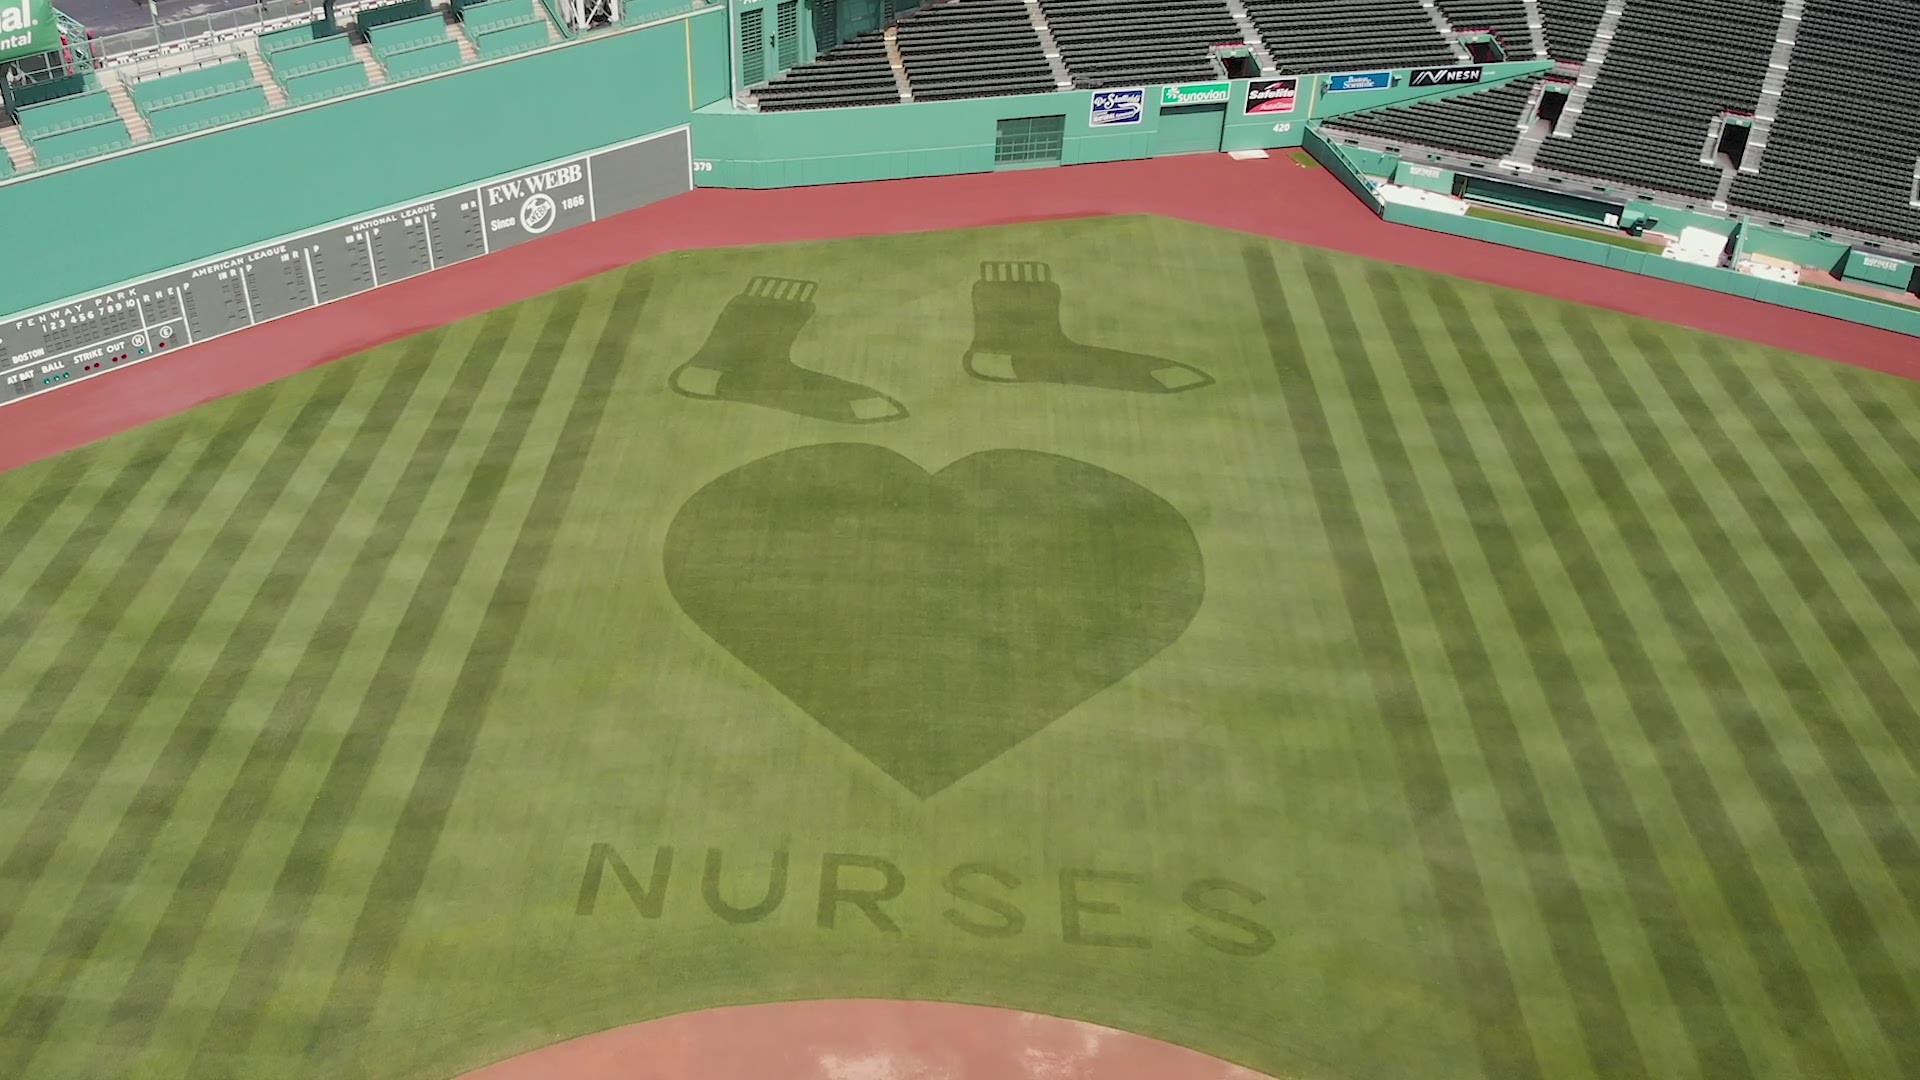 Boston Red Sox celebrate National Nurses Day with message from Fenway Park